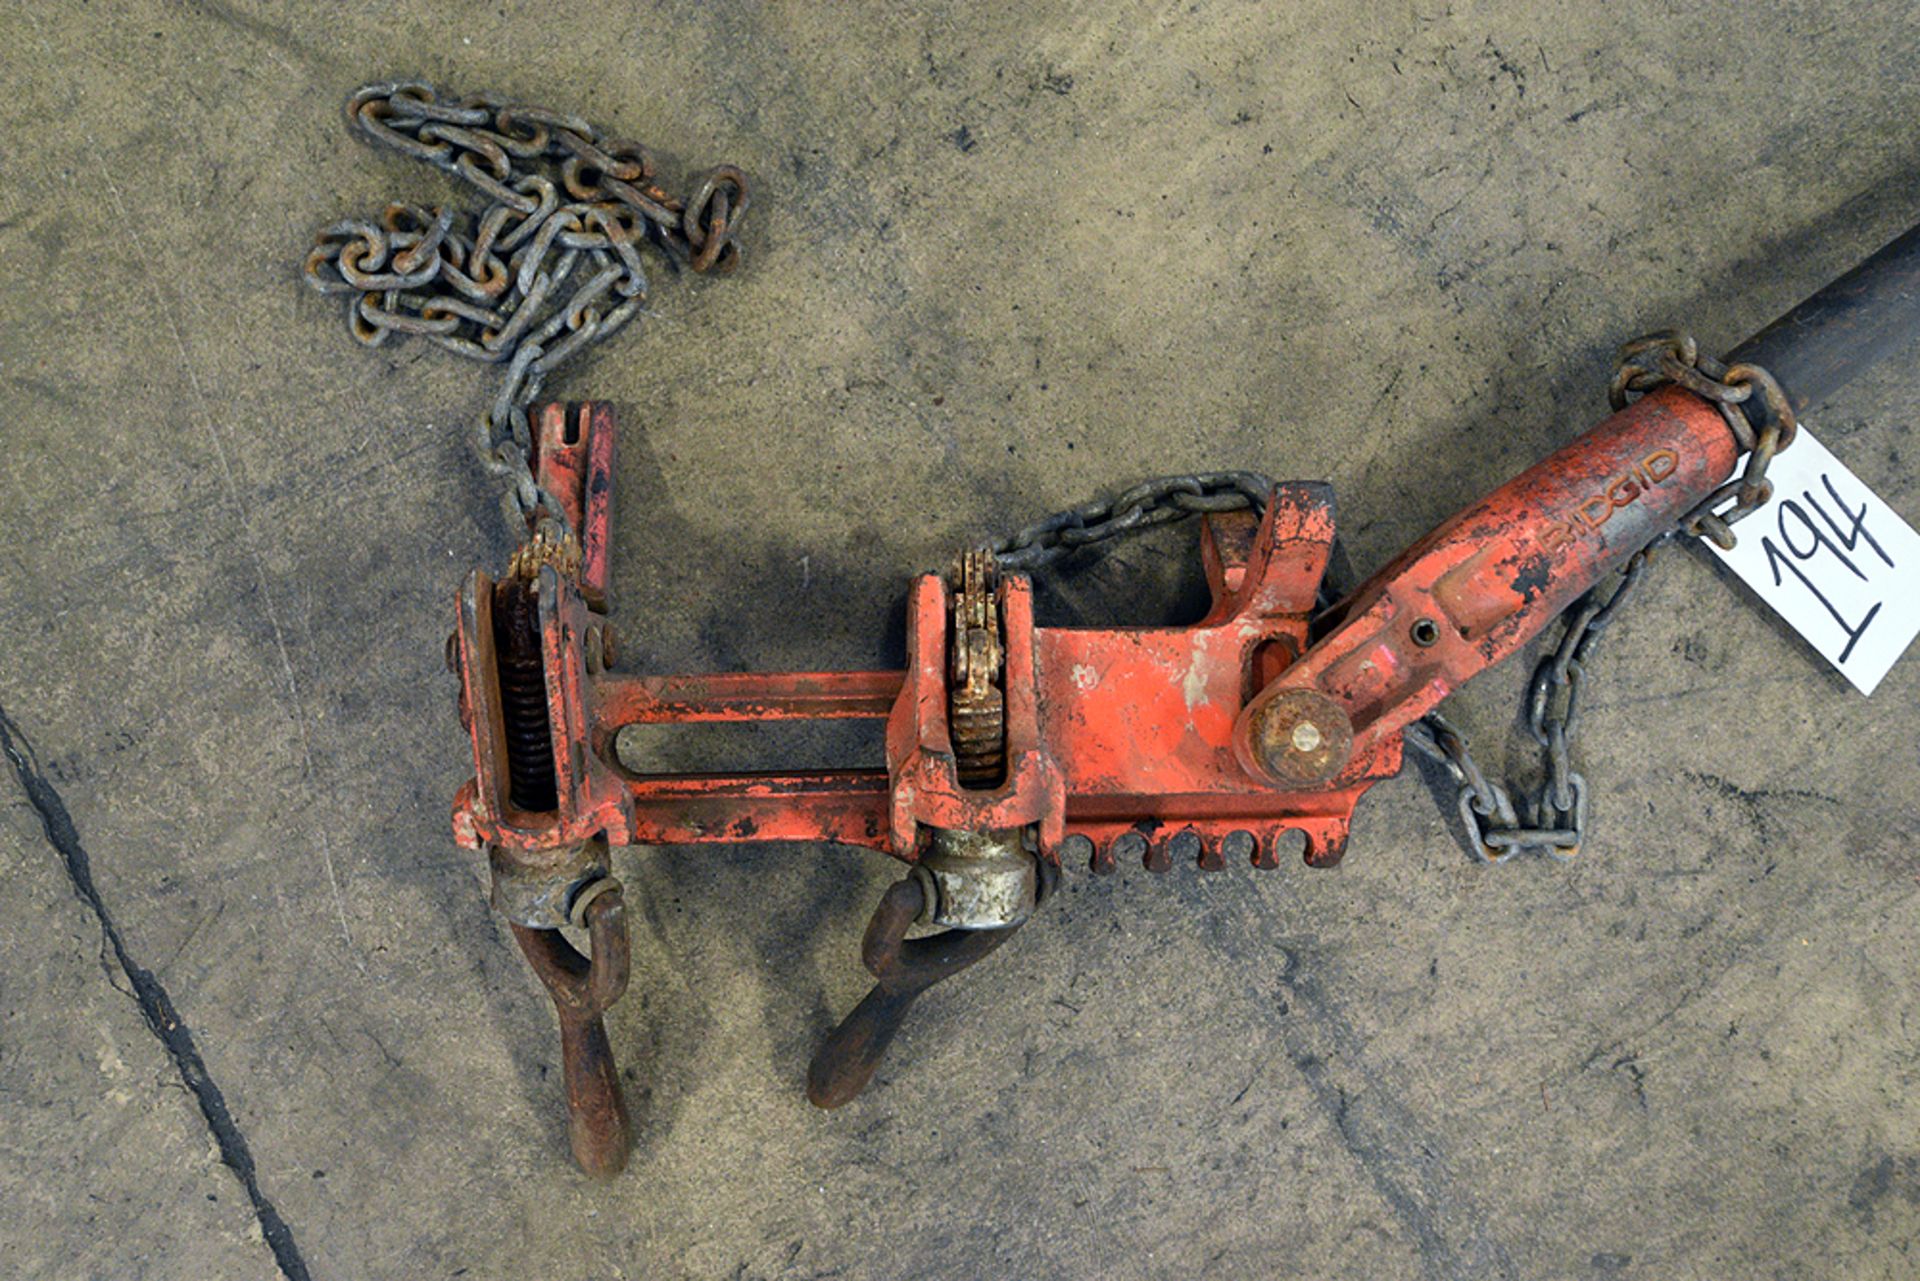 RIGID CHAIN VISE SOIL PIPE WRENCH - Image 2 of 2